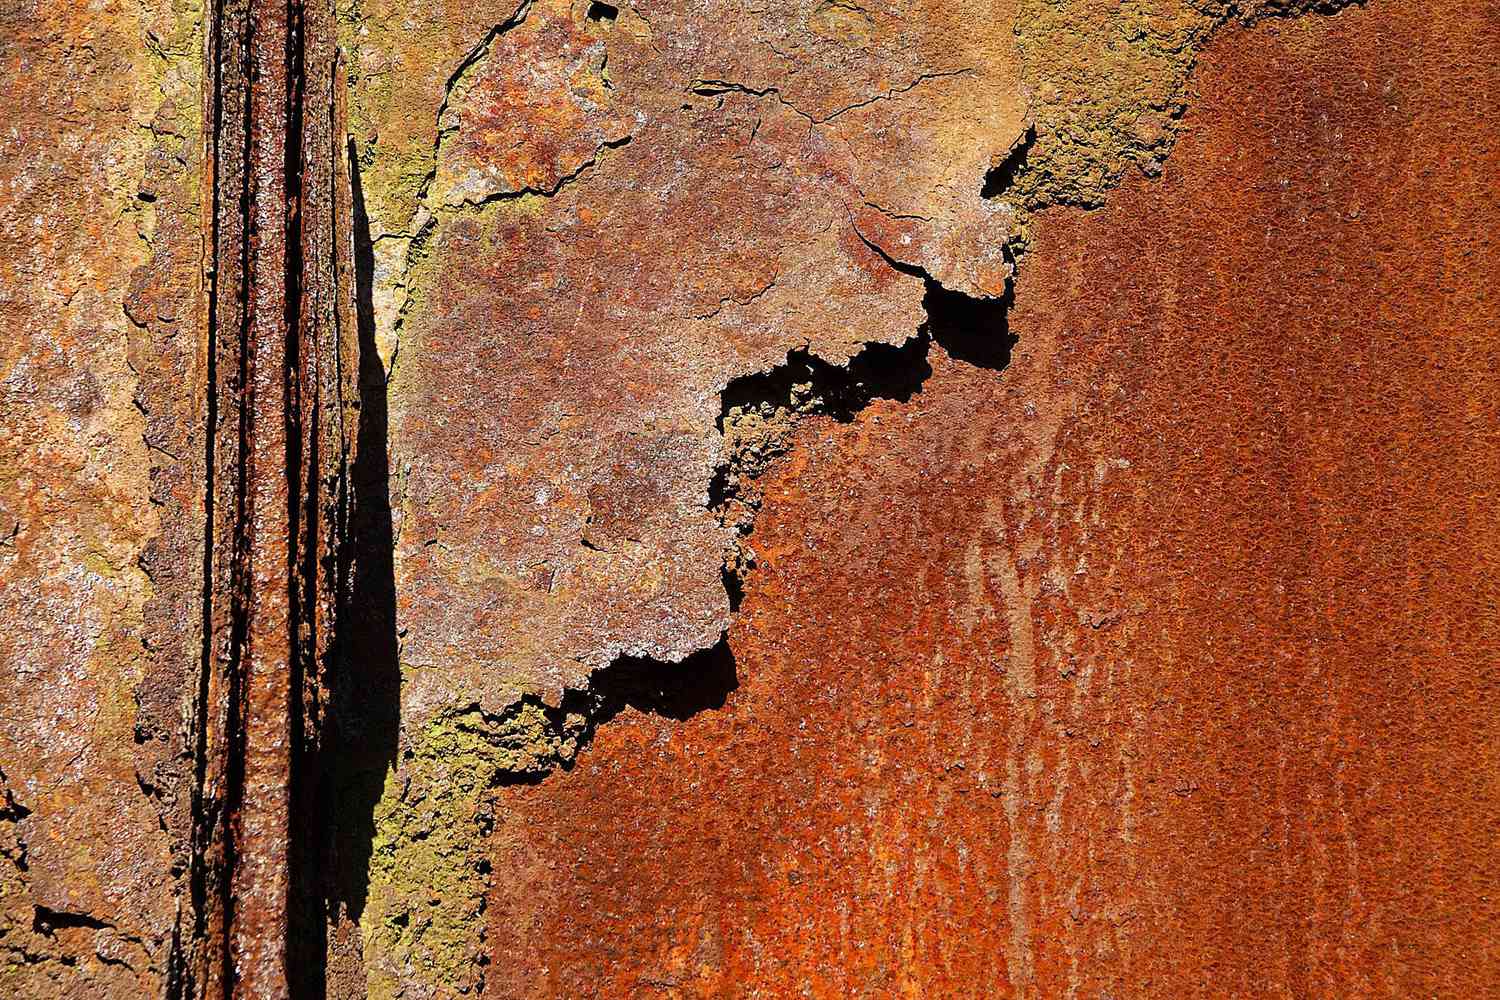 17 Astounding Facts About Corrosion - Facts.net